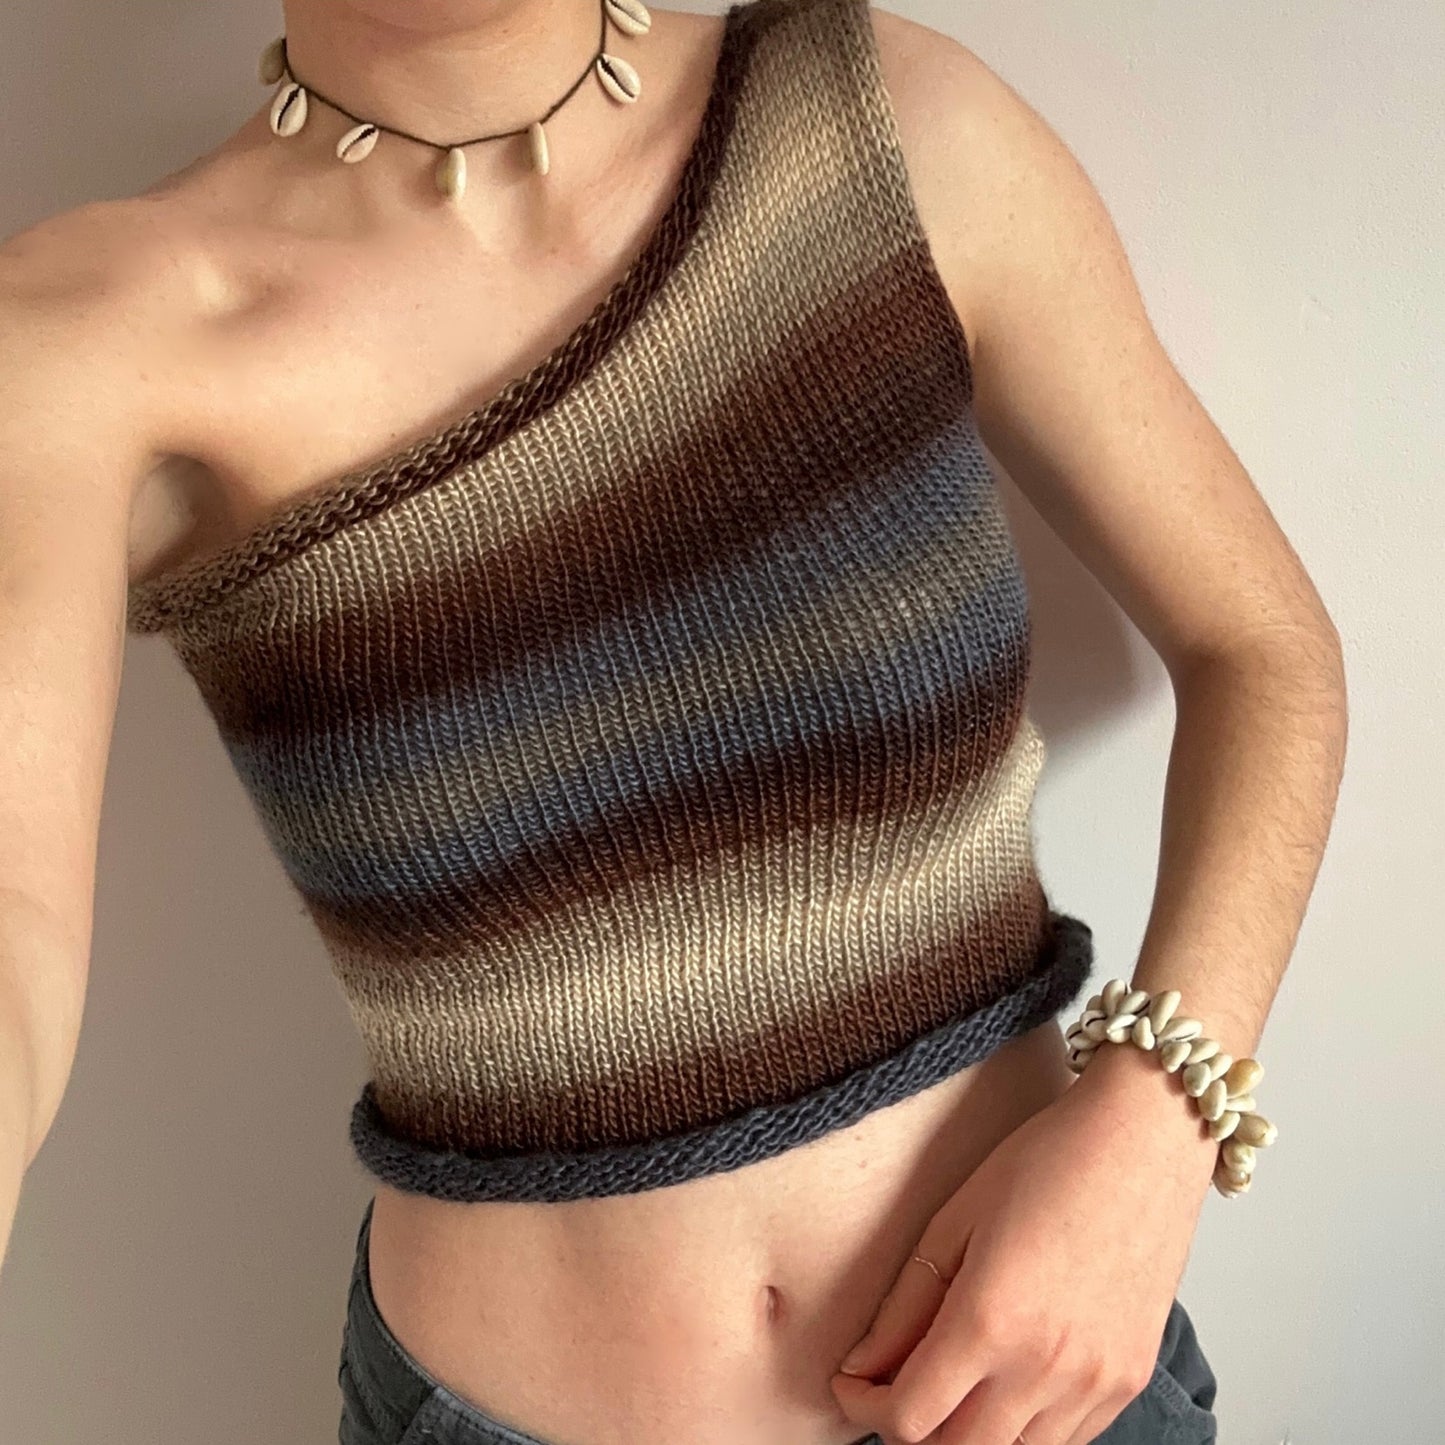 Handmade knitted one shoulder asymmetrical top in Seashell colourway